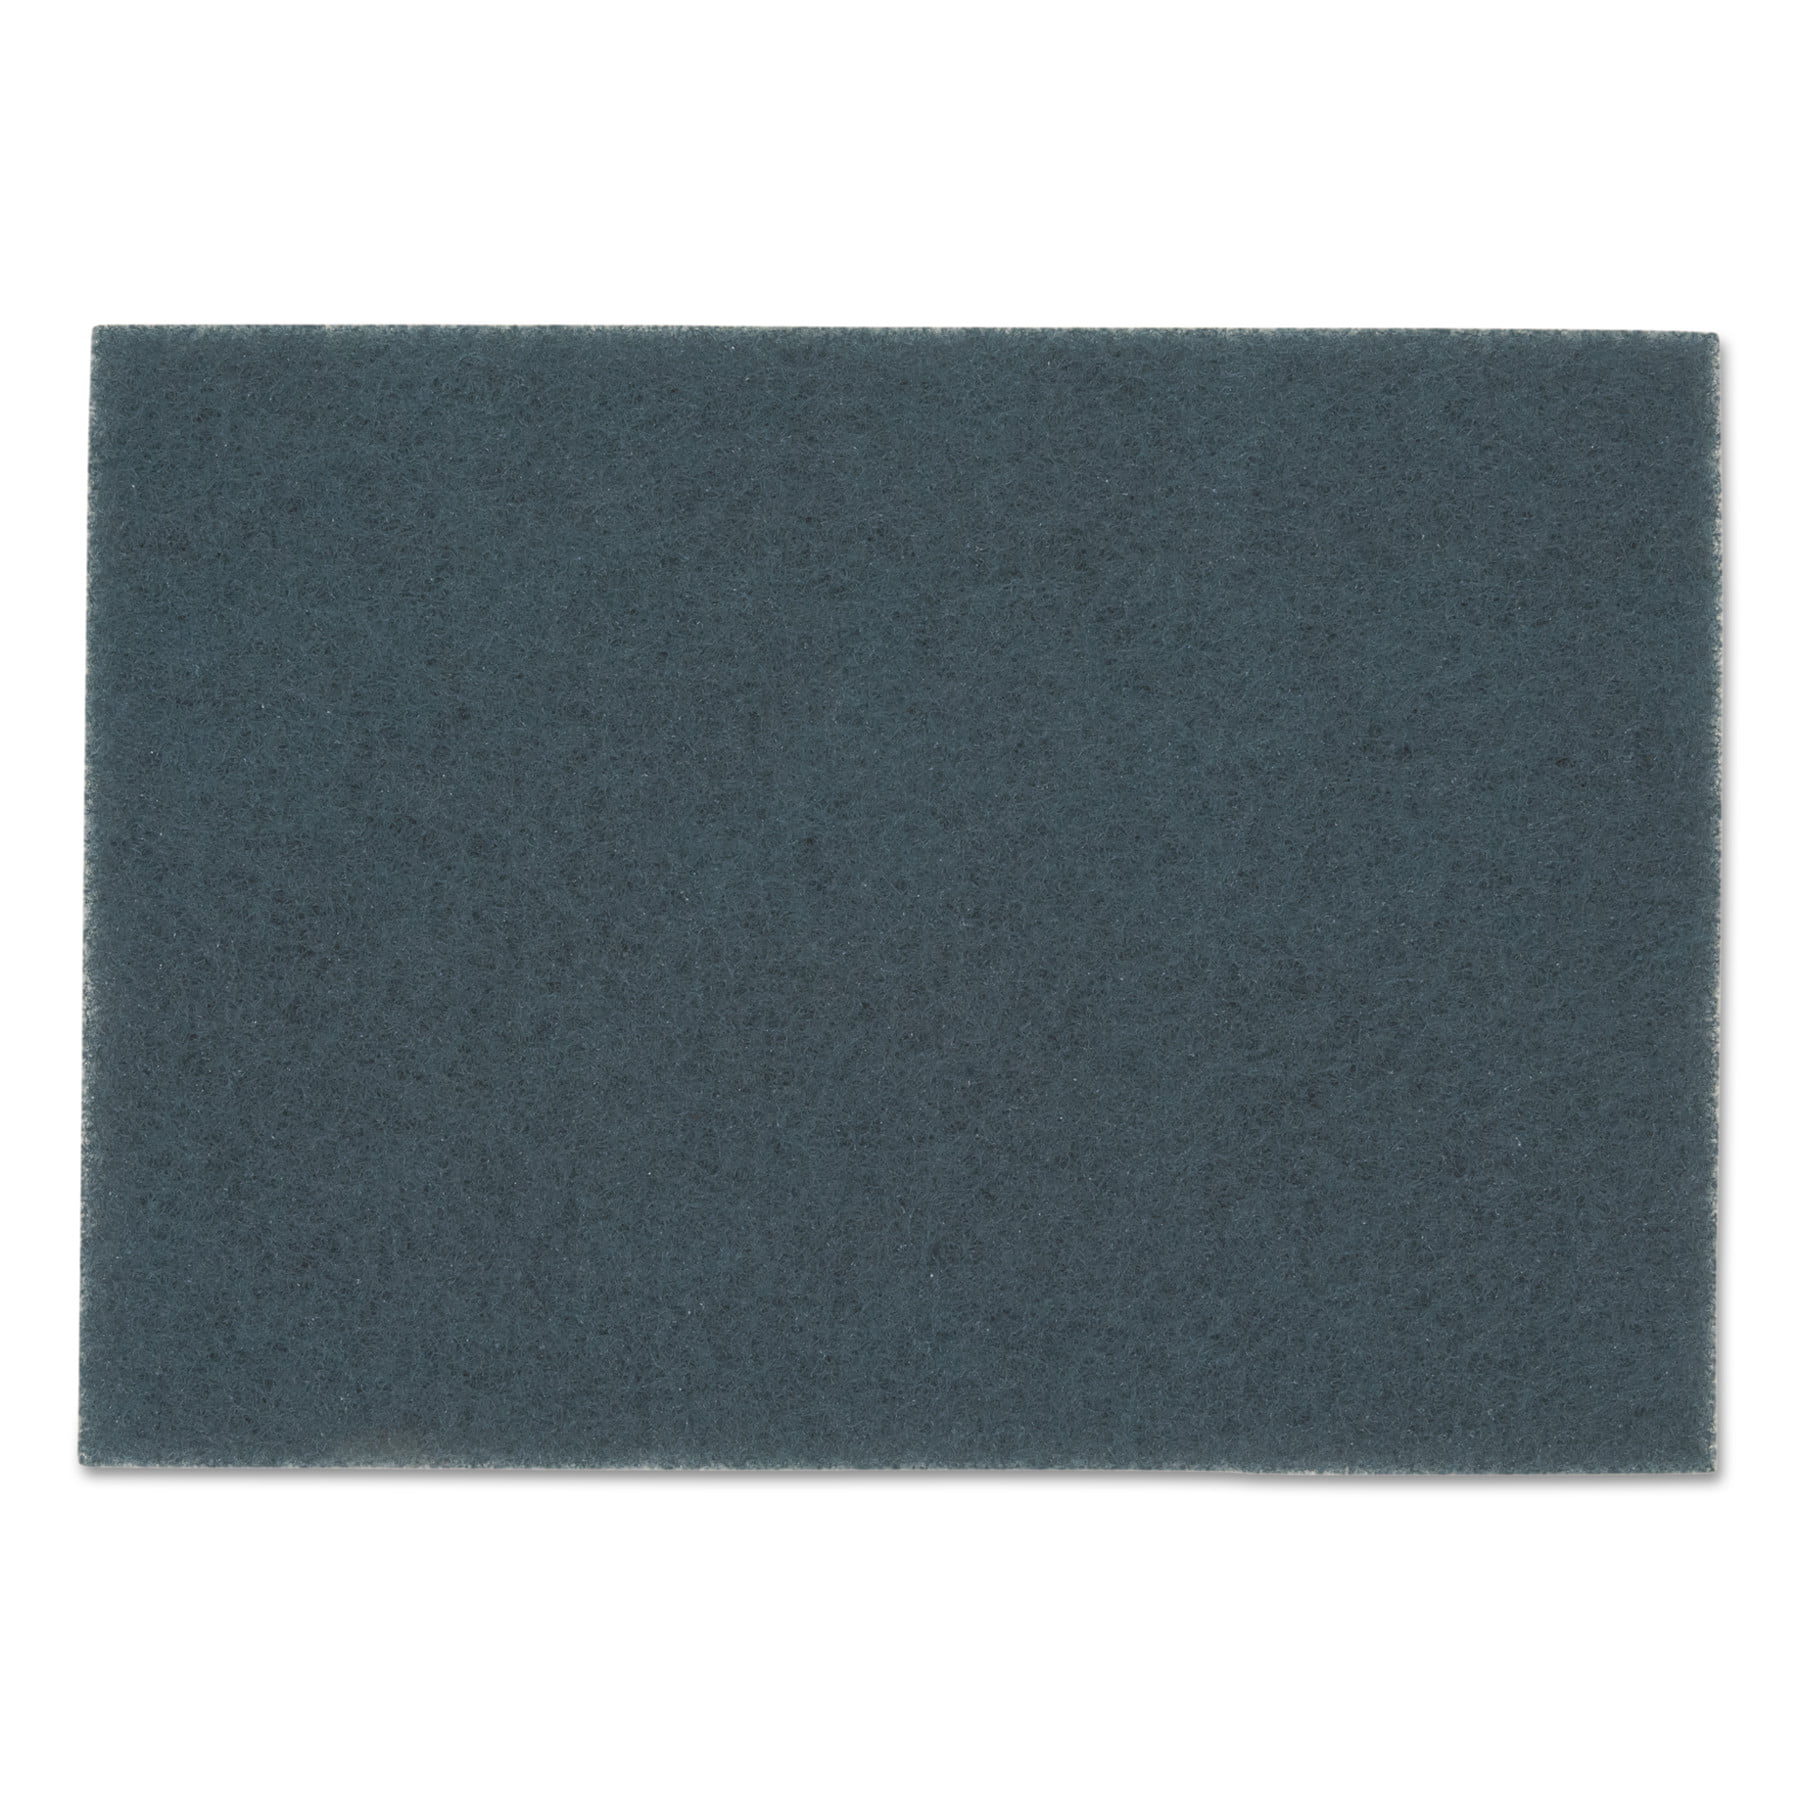 3M 5300-18 x12  Blue Cleaner Pad PK 5 18 in x 12in 